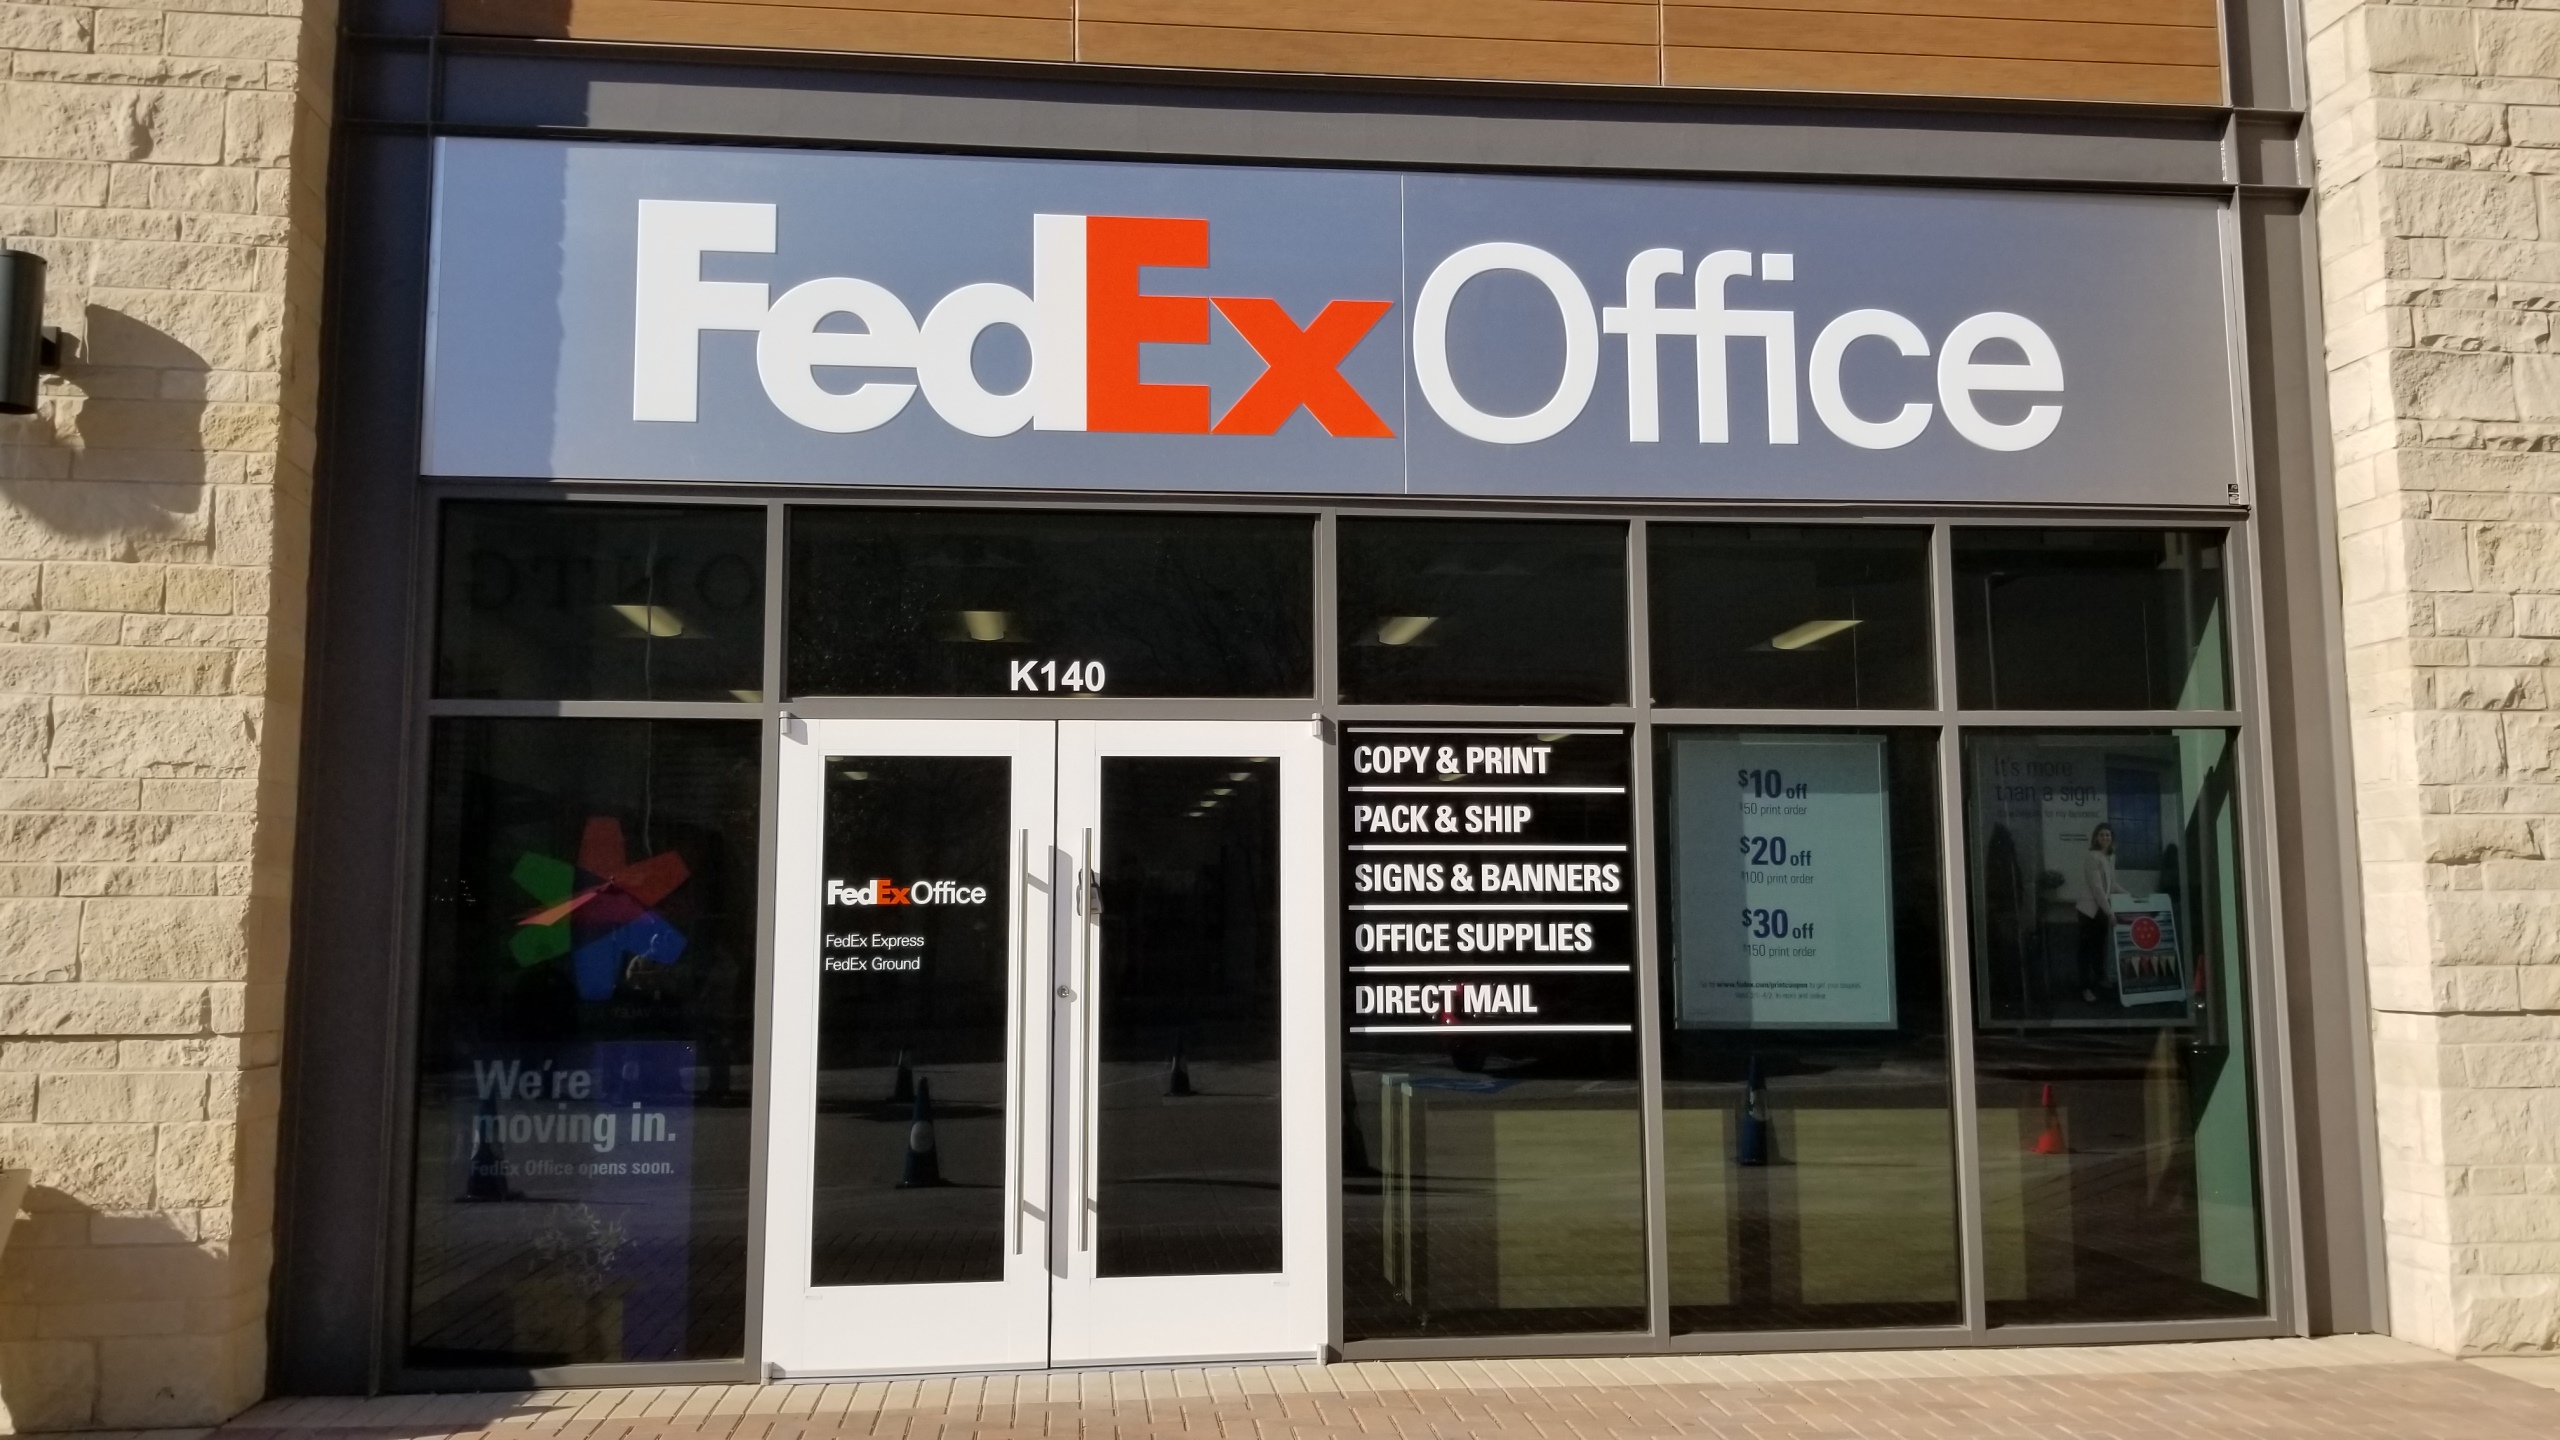 Exterior photo of FedEx Office location at 5901 Winthrop St\t Print quickly and easily in the self-service area at the FedEx Office location 5901 Winthrop St from email, USB, or the cloud\t FedEx Office Print & Go near 5901 Winthrop St\t Shipping boxes and packing services available at FedEx Office 5901 Winthrop St\t Get banners, signs, posters and prints at FedEx Office 5901 Winthrop St\t Full service printing and packing at FedEx Office 5901 Winthrop St\t Drop off FedEx packages near 5901 Winthrop St\t FedEx shipping near 5901 Winthrop St